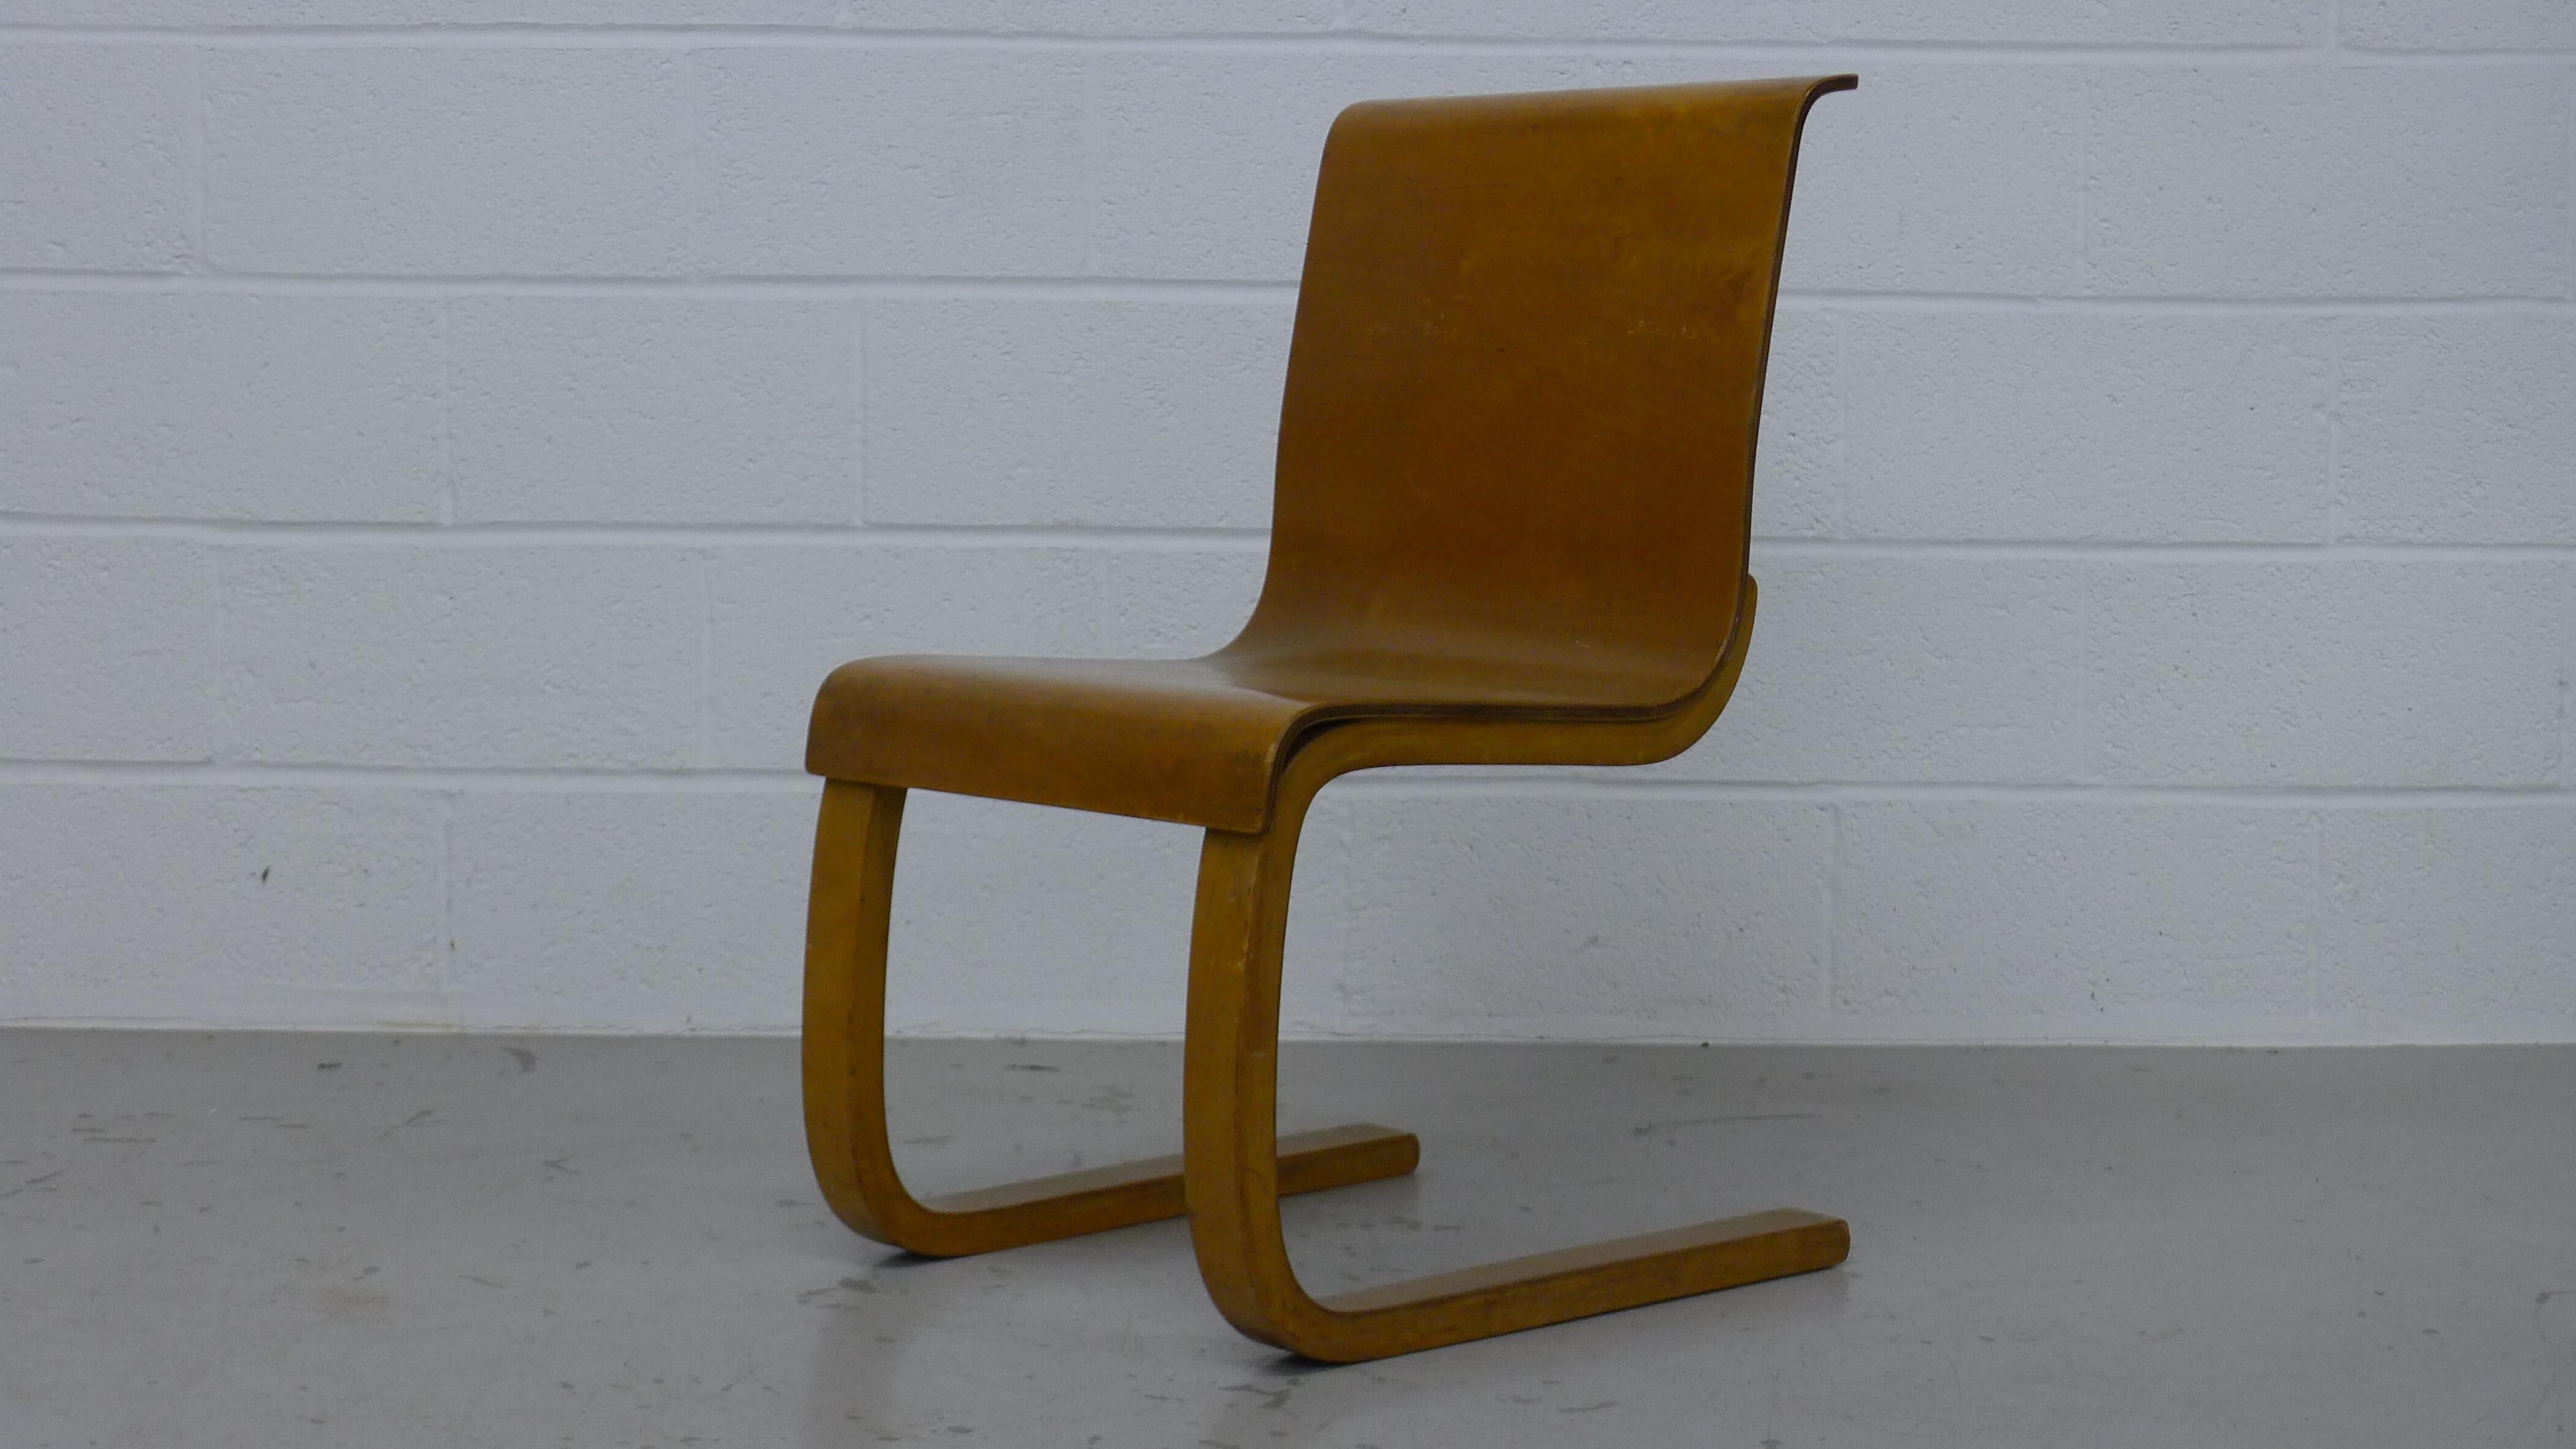 1930s plywood chair